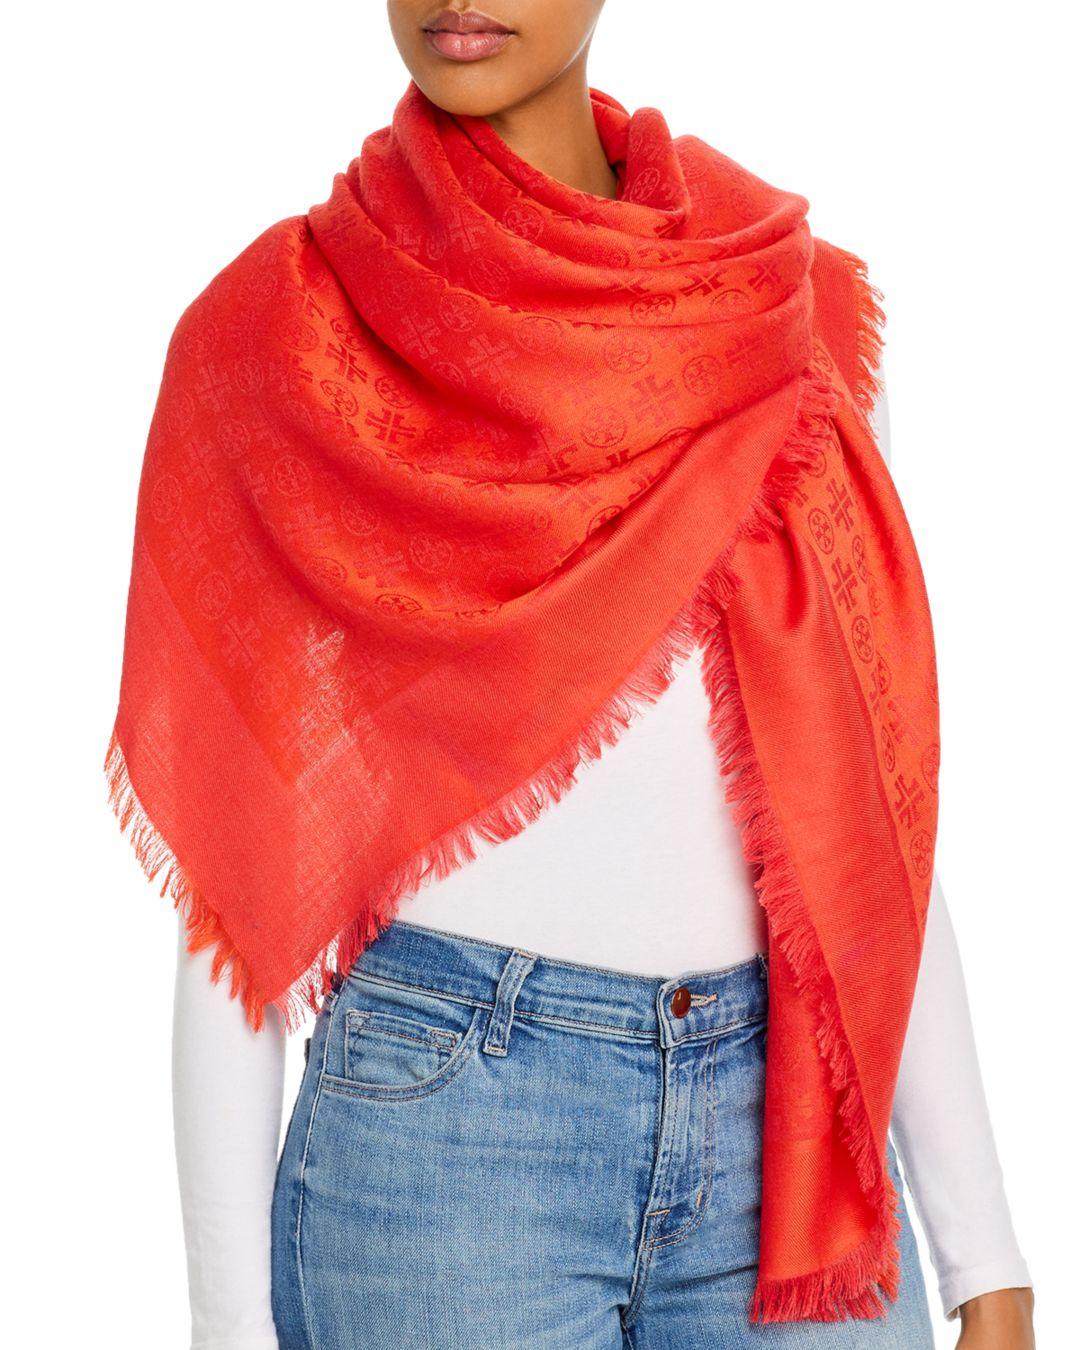 Tory Burch Wool Logo Jacquard Traveler Scarf in Bright Red (Red 